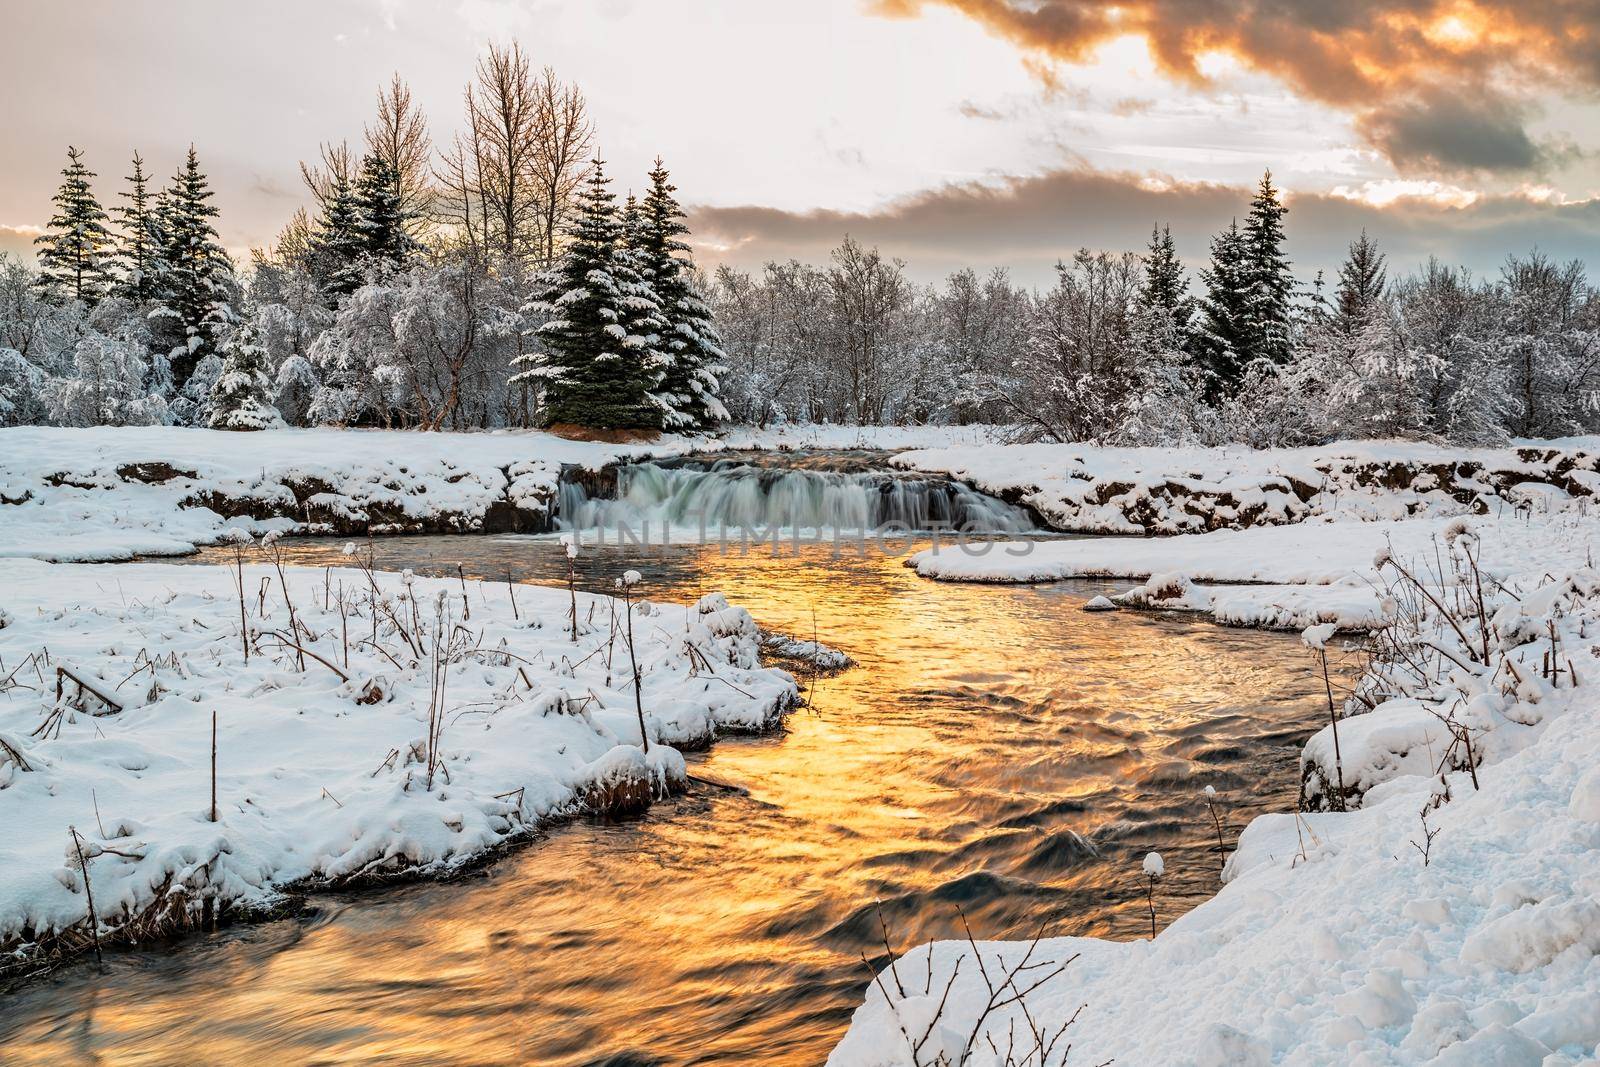 Winter in Ellidaardalur at sunrise along the river and waterfall, Iceland